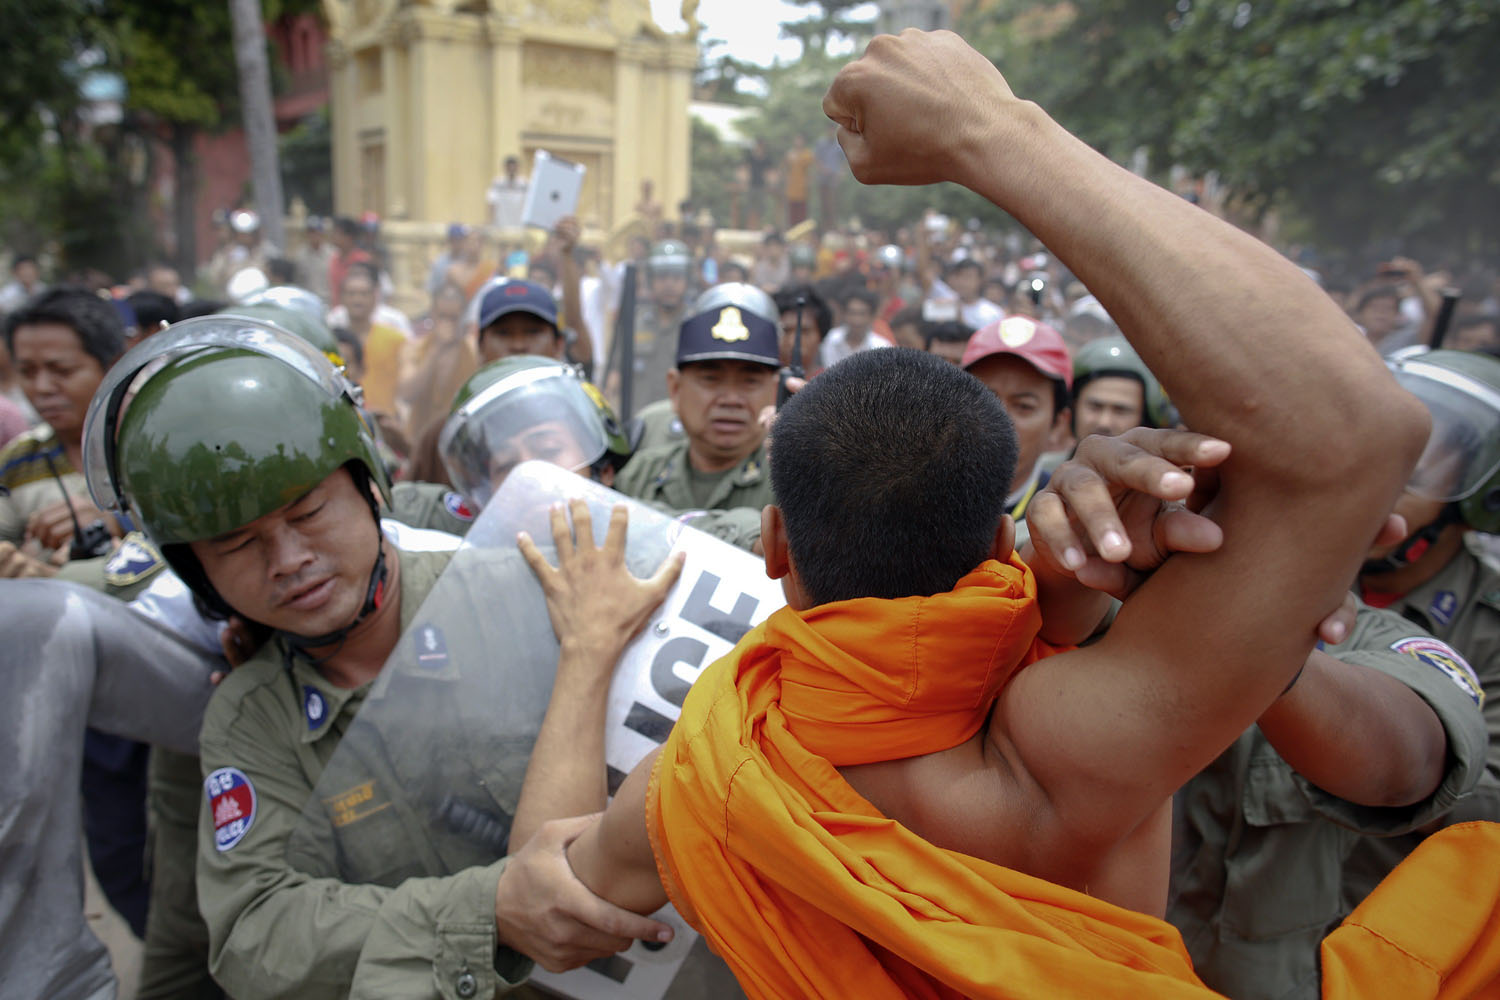 July 28, 2013. Riot policemen protect a man, that was accused of trying to hit a Buddhist monk, as a monk tries to punch him after an incident at a polling station in which voters protested against alleged election irregularities in Phnom Penh, Cambodia.